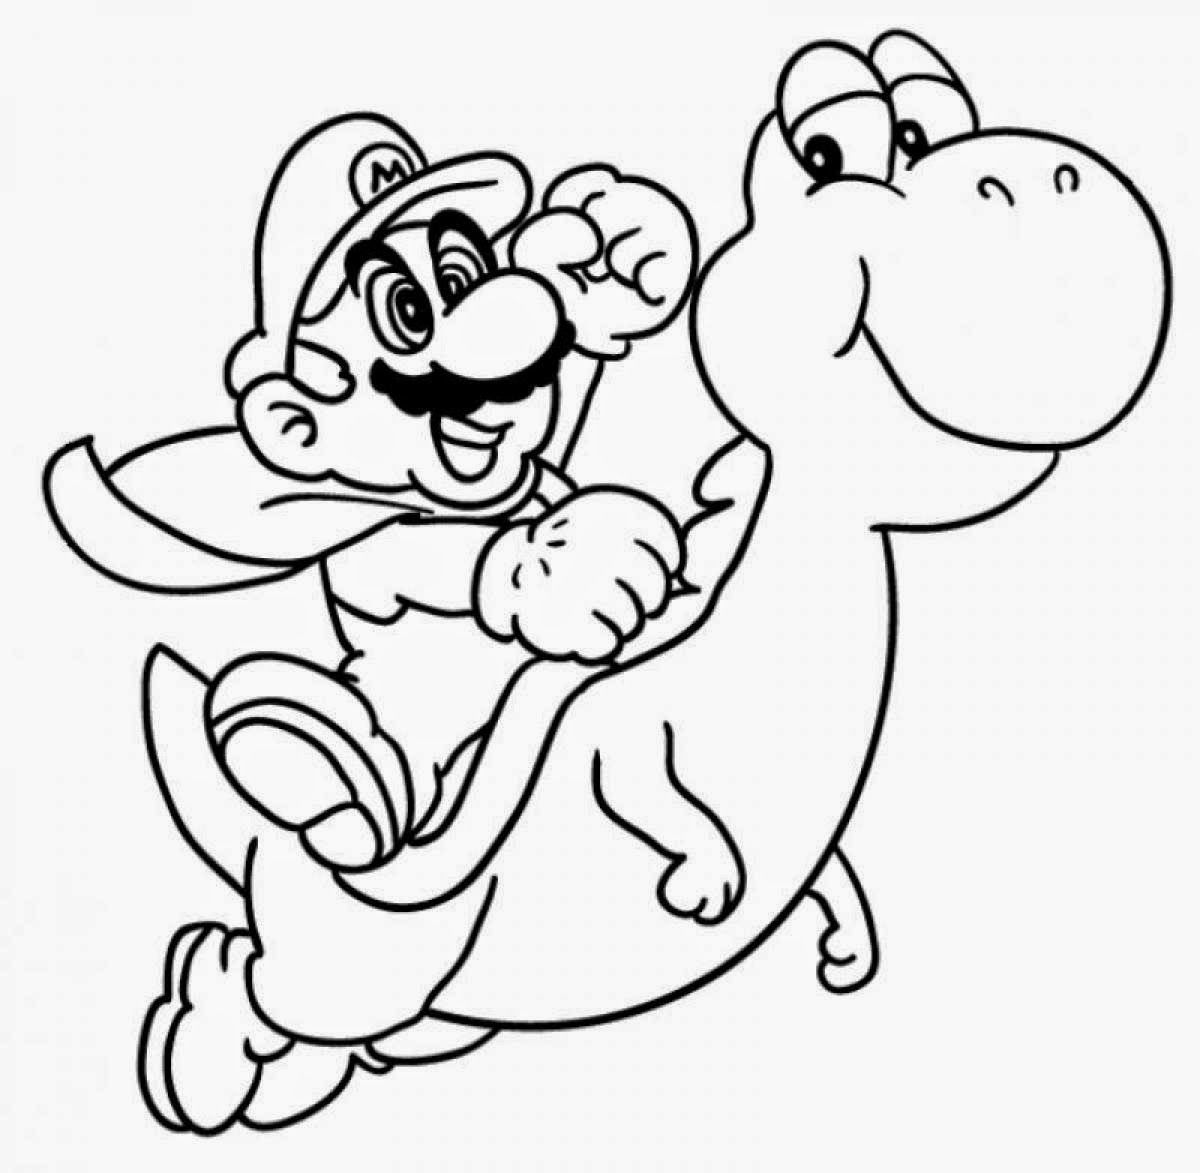 Free Printable Mario Coloring Pages For Kids: Mario Coloring Pages ...